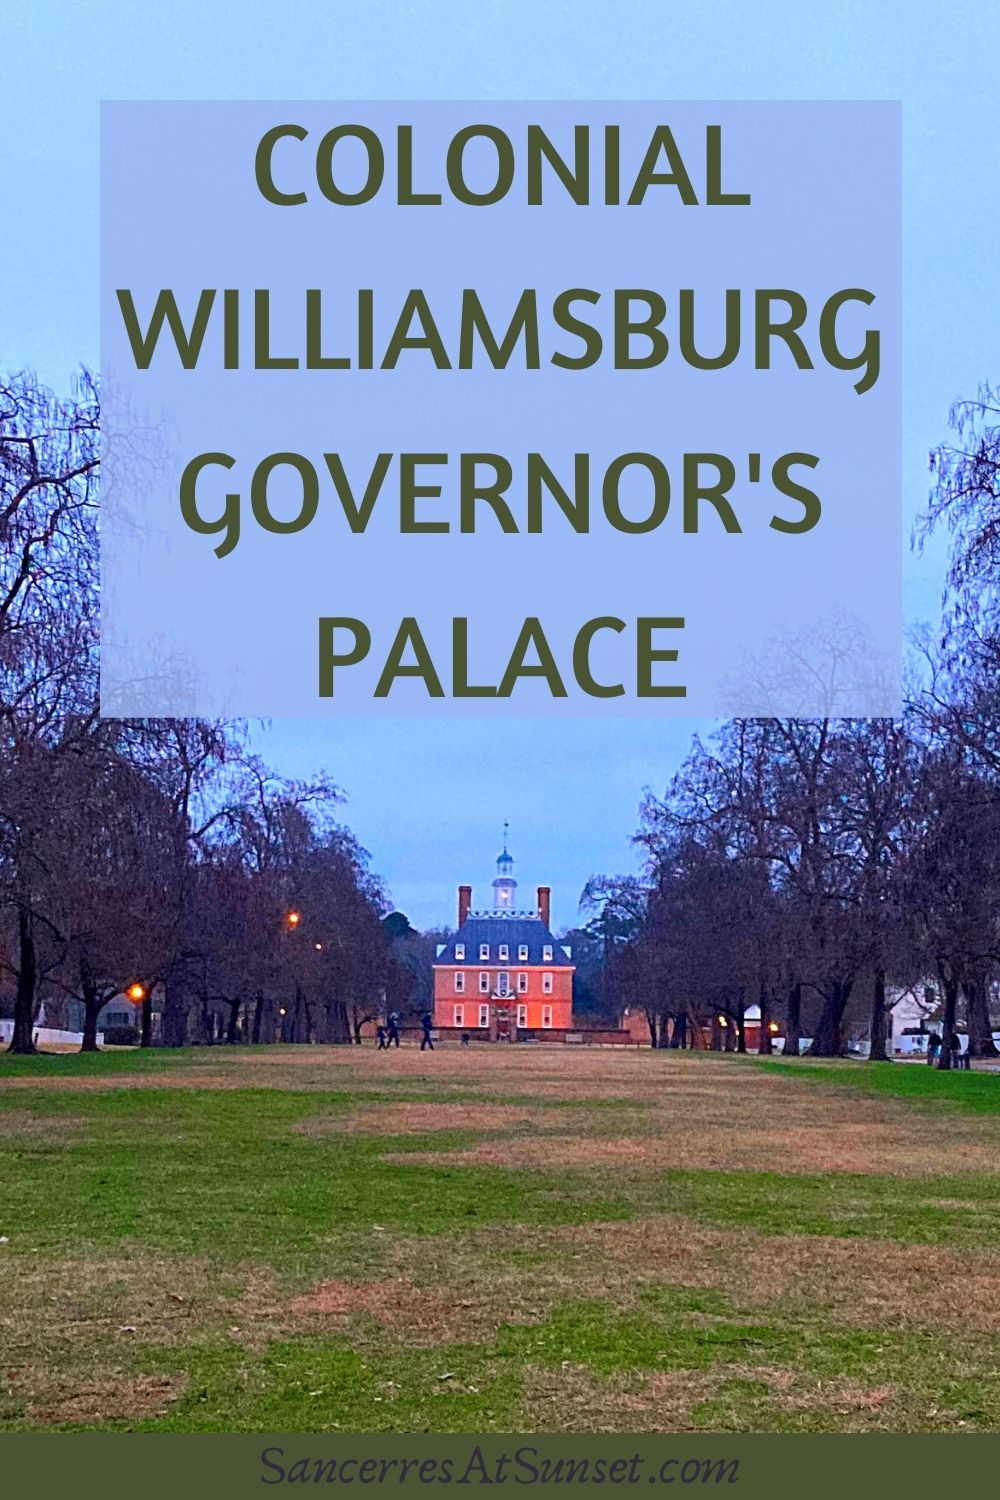 The Governor\'s Palace at Colonial Williamsburg